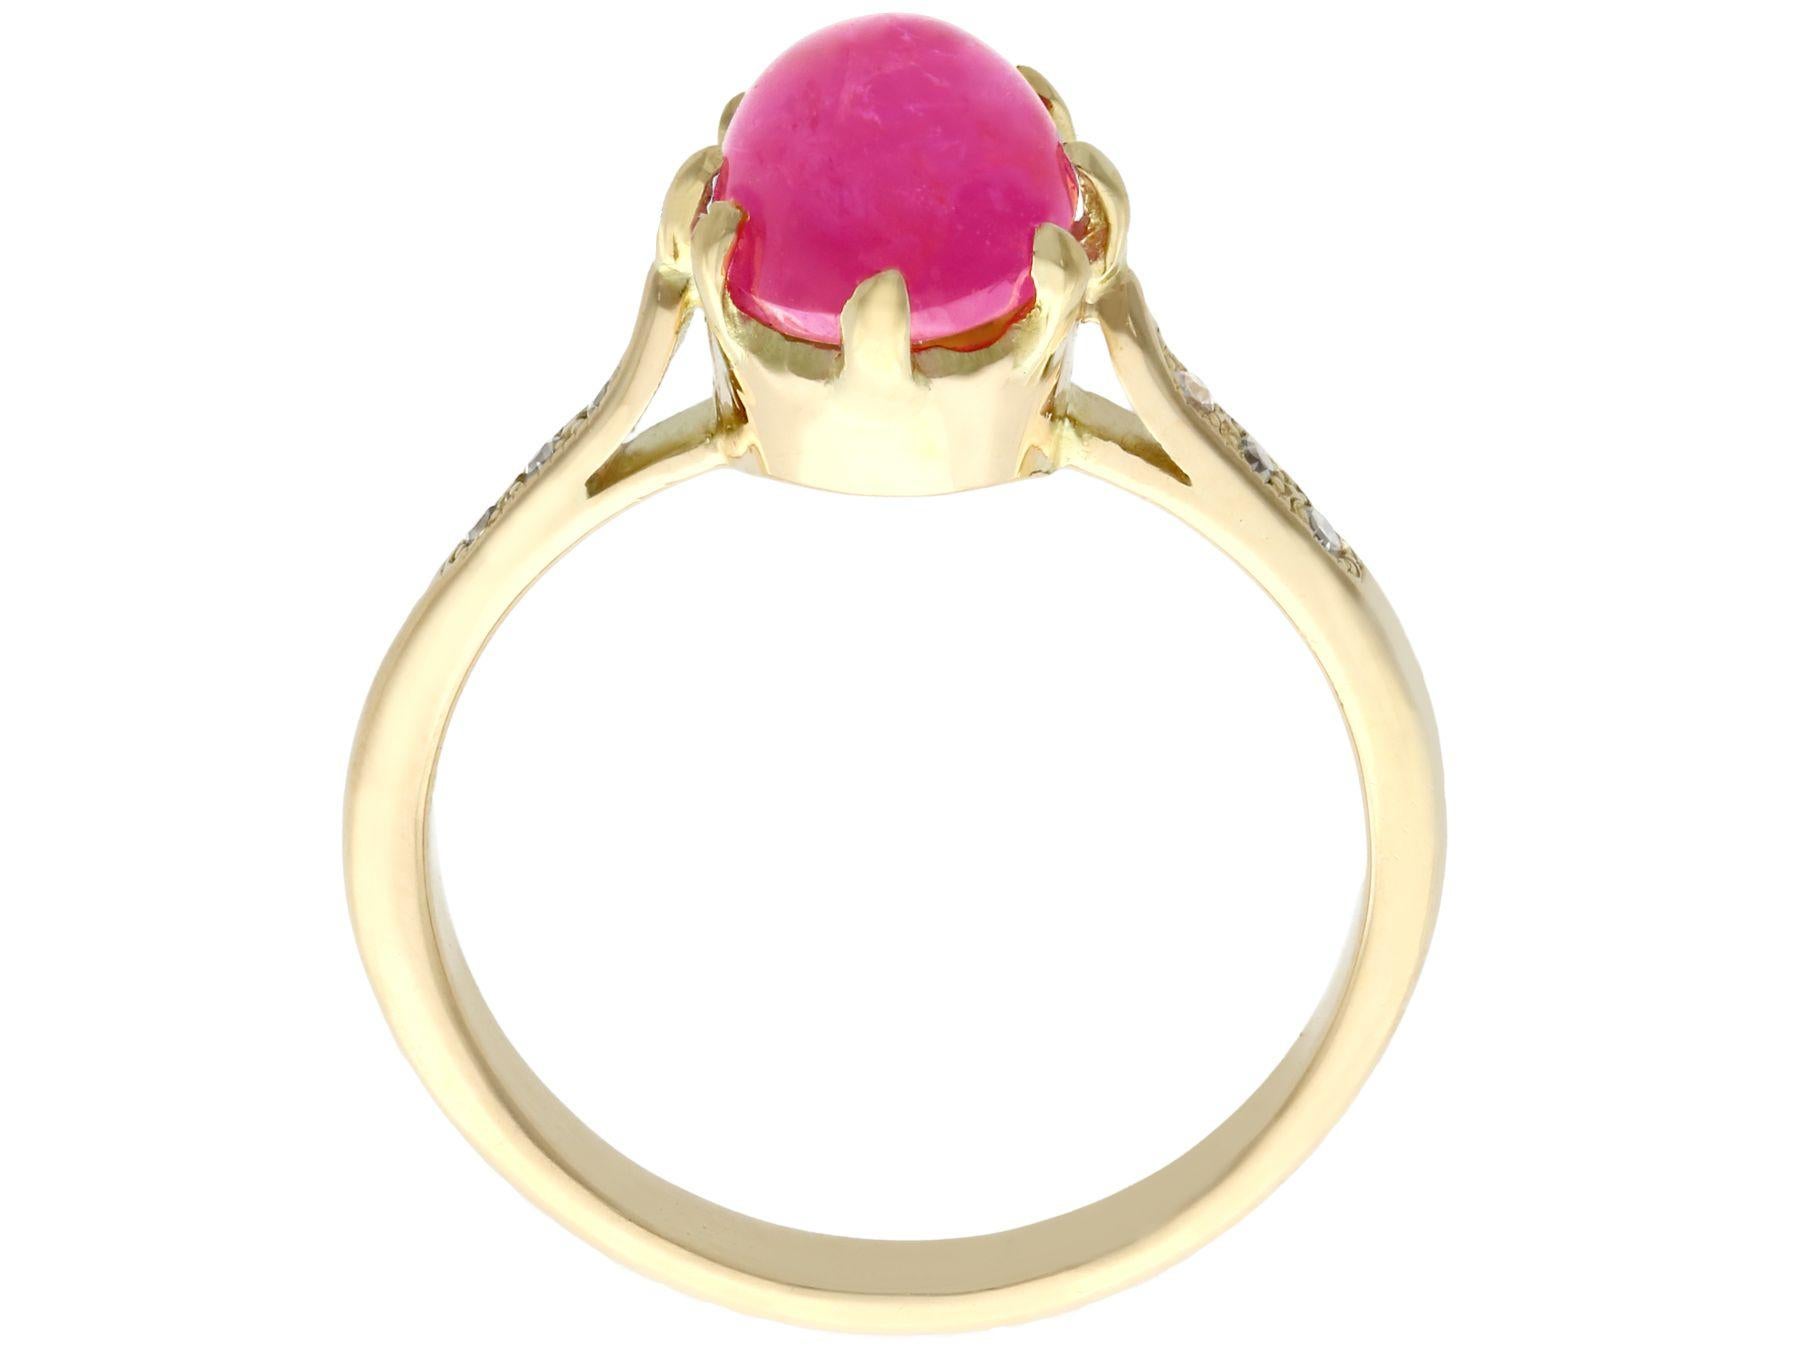 Vintage 1950s 2.68 Carat Cabochon Cut Star Ruby Diamond Gold Engagement Ring For Sale 1